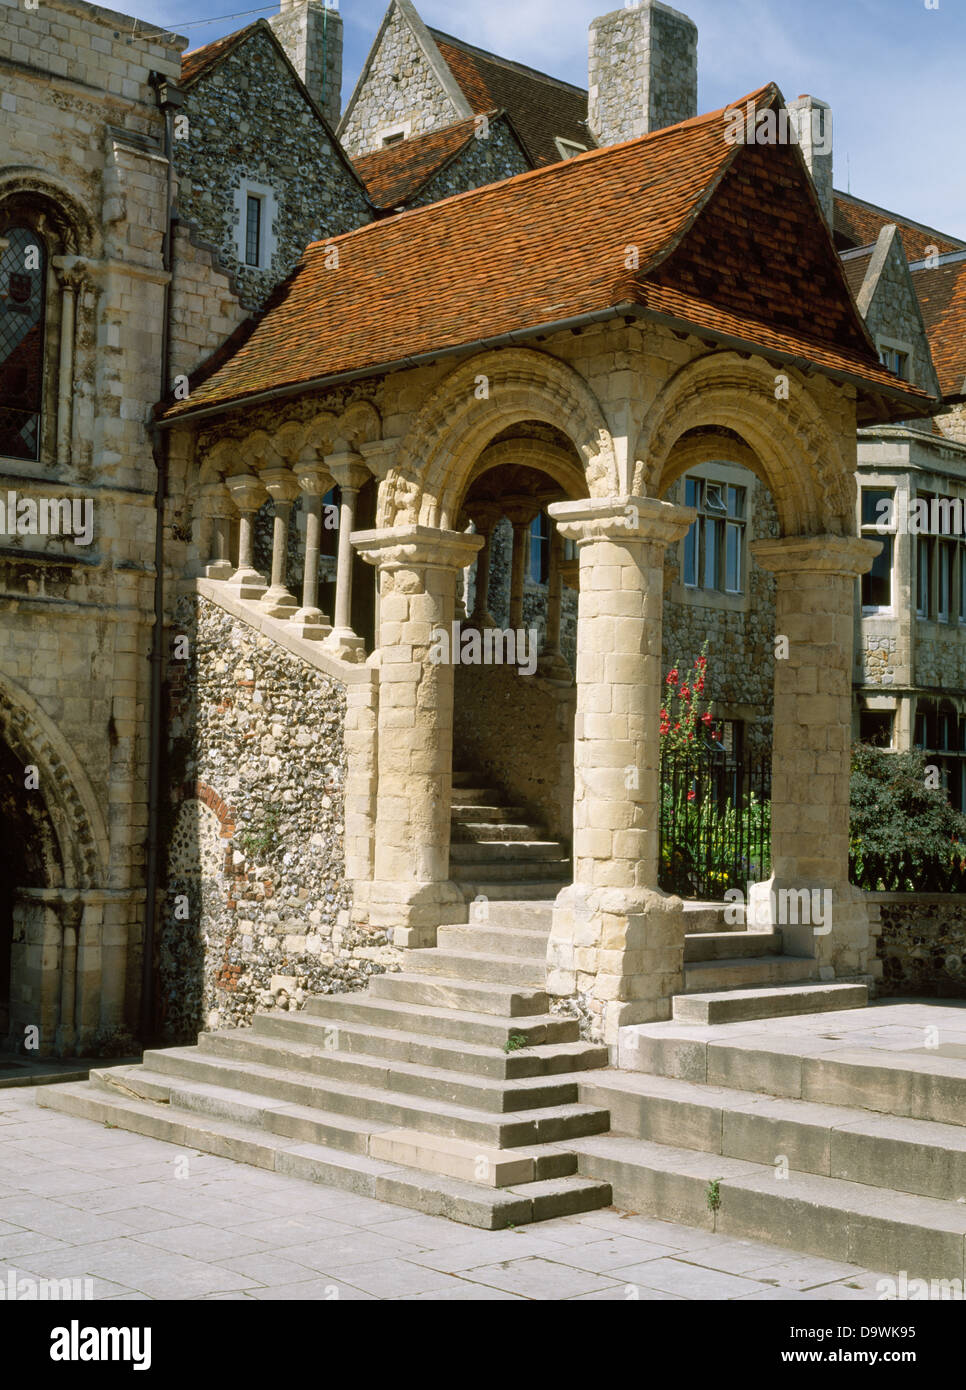 Canterbury, Kent: the Norman Great Staircase (c 1153) leading to the Almonry of the former Benedictine priory of Christ Church (Canterbury Cathedral). Stock Photo